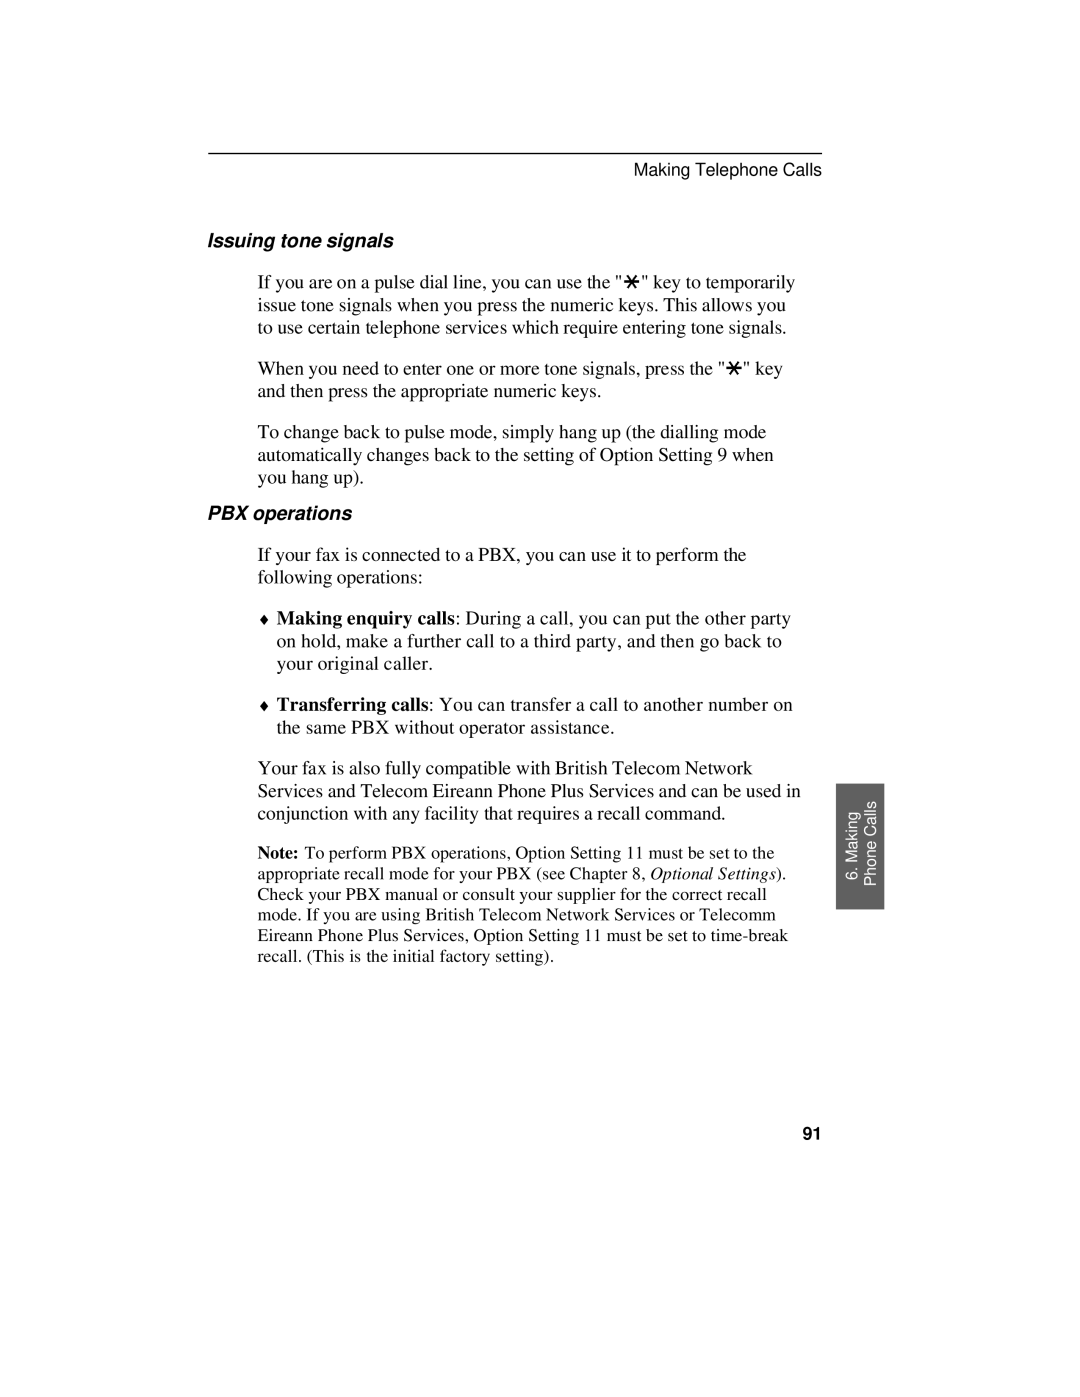 Sharp UX-470 operation manual Issuing tone signals, PBX operations 